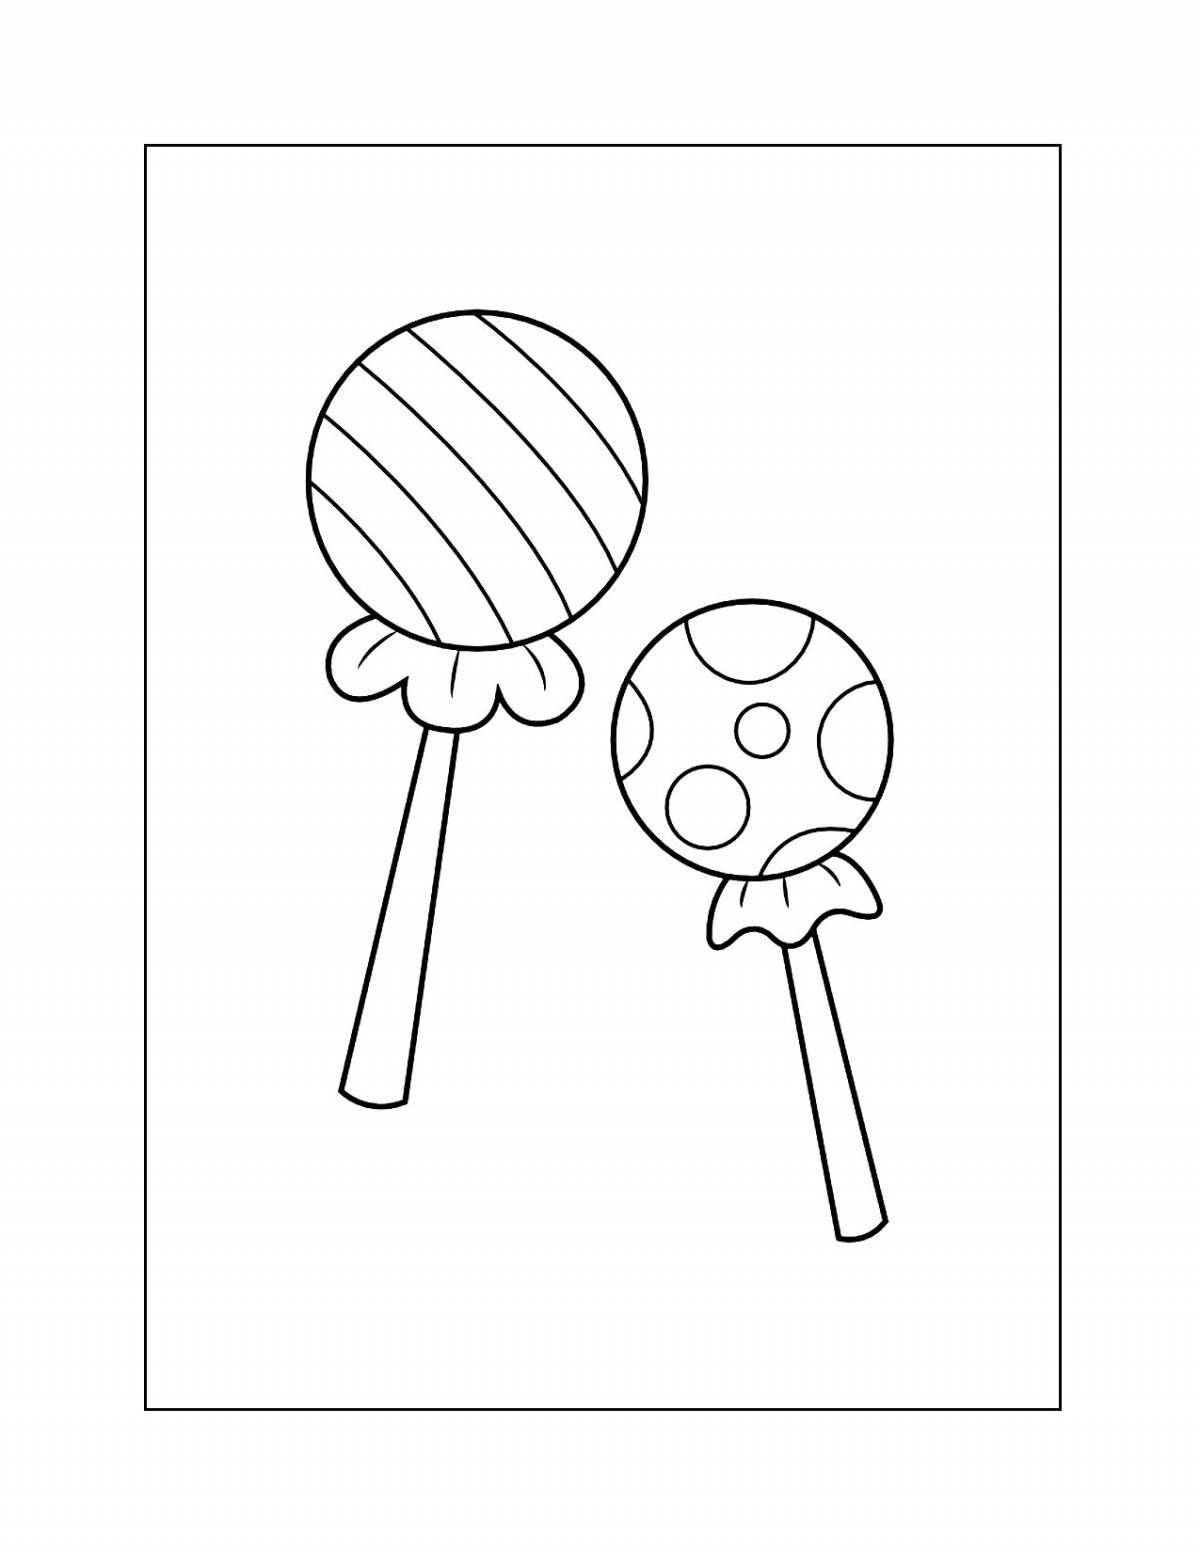 Great candy coloring book for preschoolers 2-3